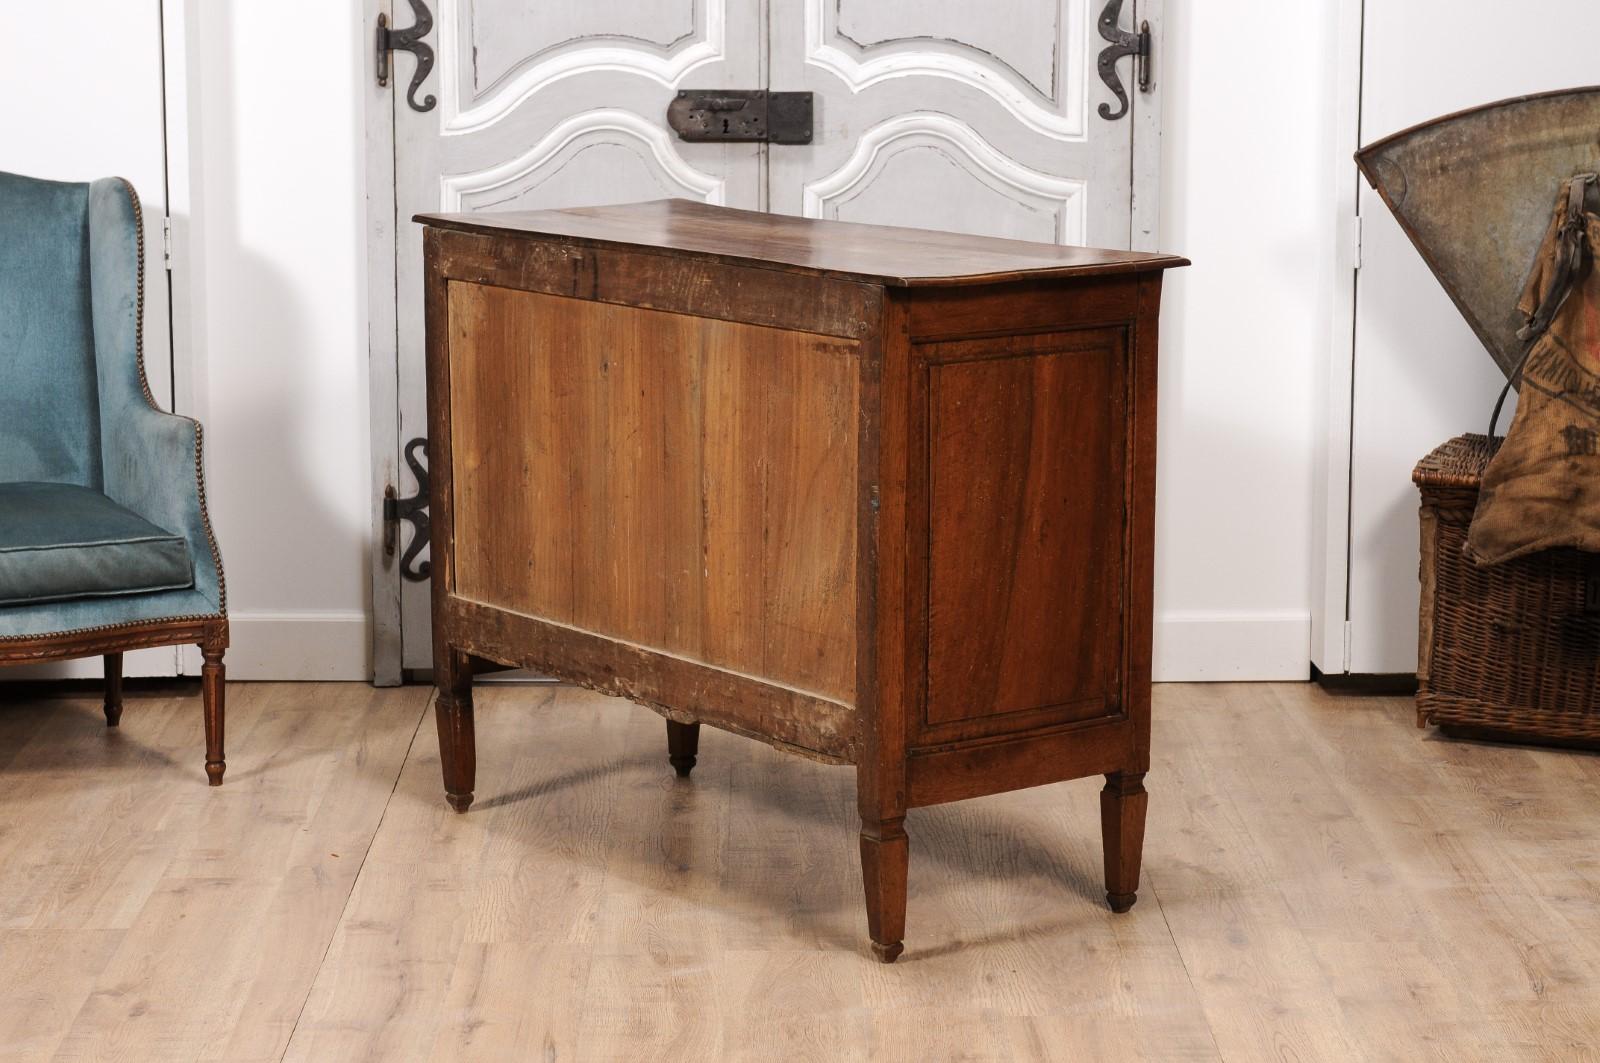 Italian 1820s Serpentine Front Walnut Commode with Three Drawers For Sale 1